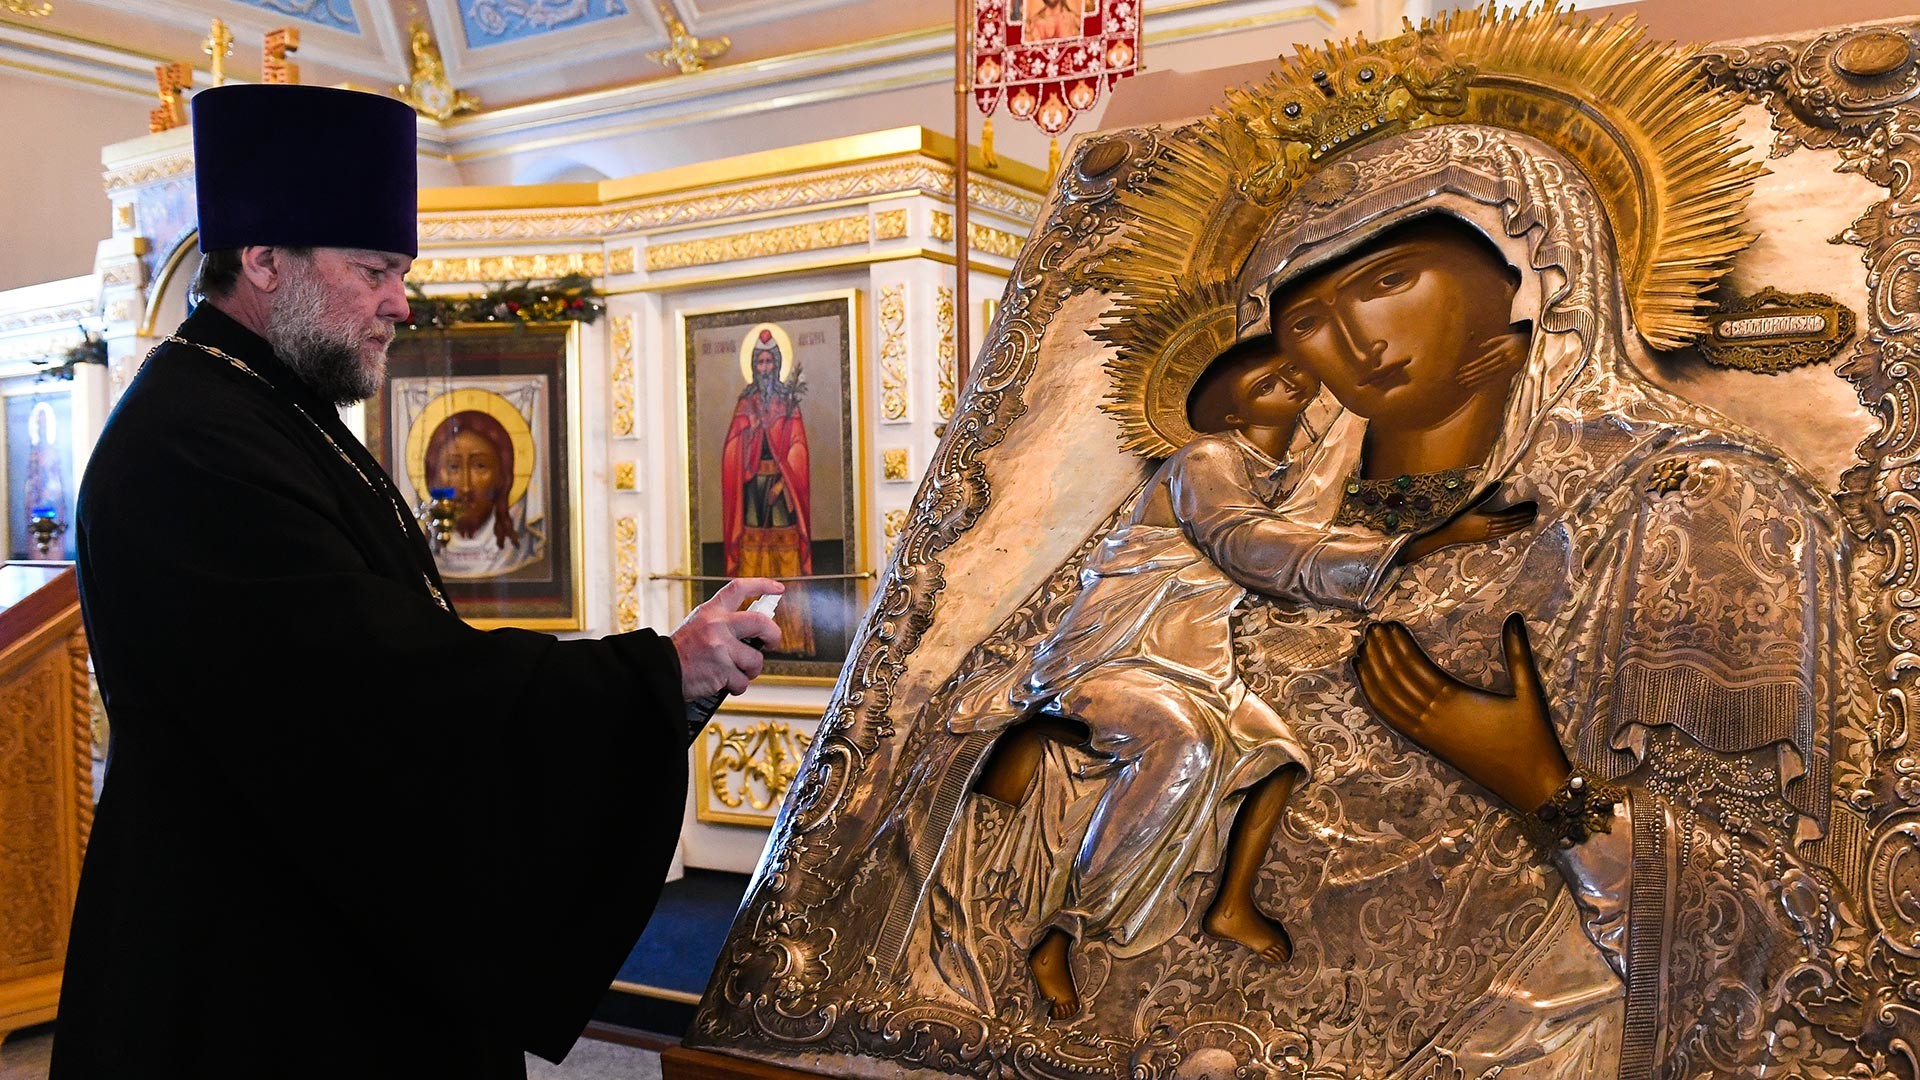 The rector of the Church, priest Vladimir Dukhovich during the sanitary treatment of the icon in the Church of St. Alexy in Rogozhskaya Sloboda